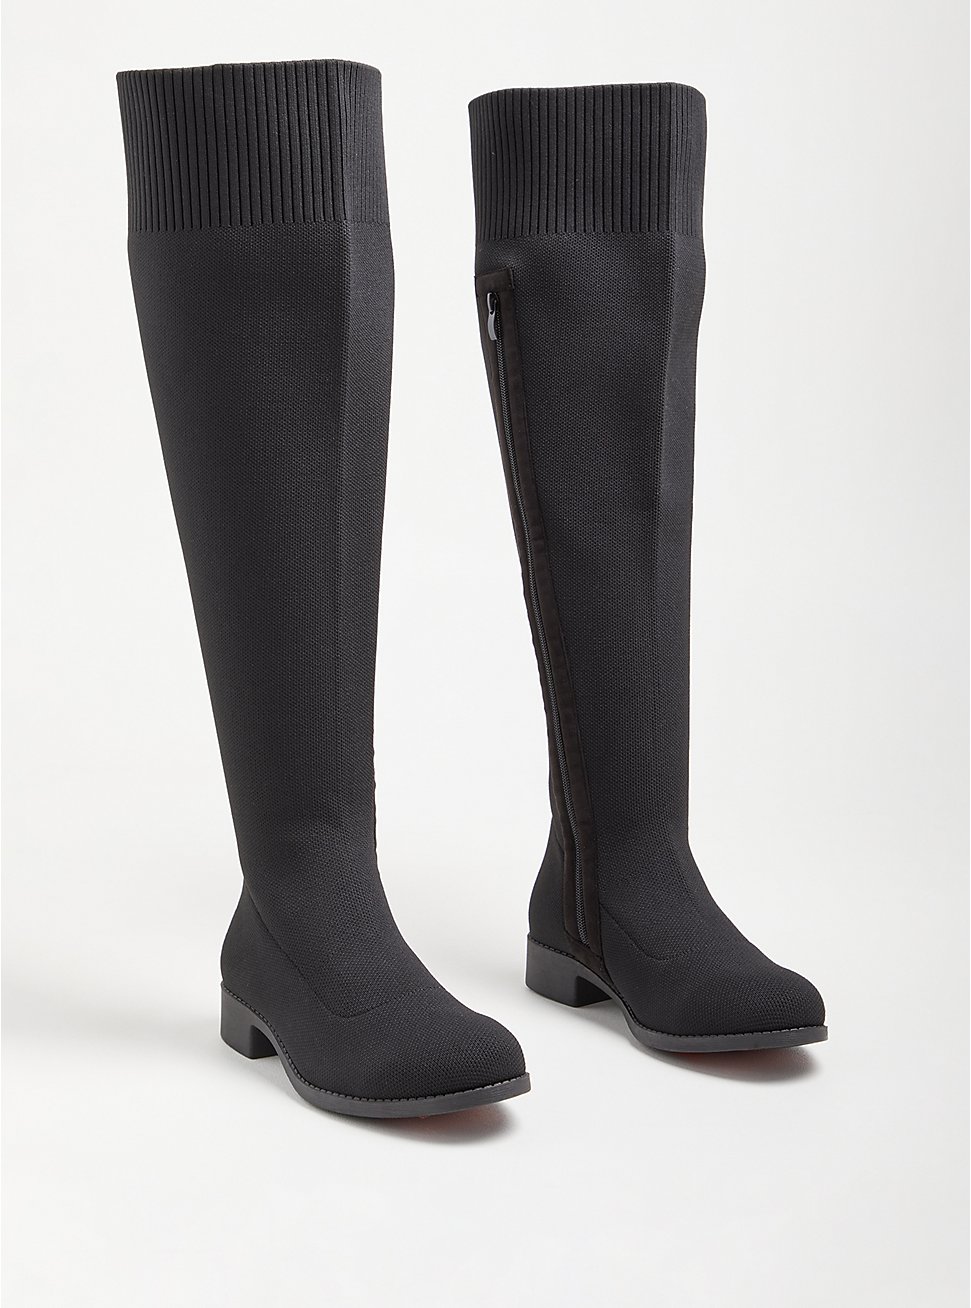 Stretch Knit Over The Knee Boot - Black (WW), BLACK, hi-res